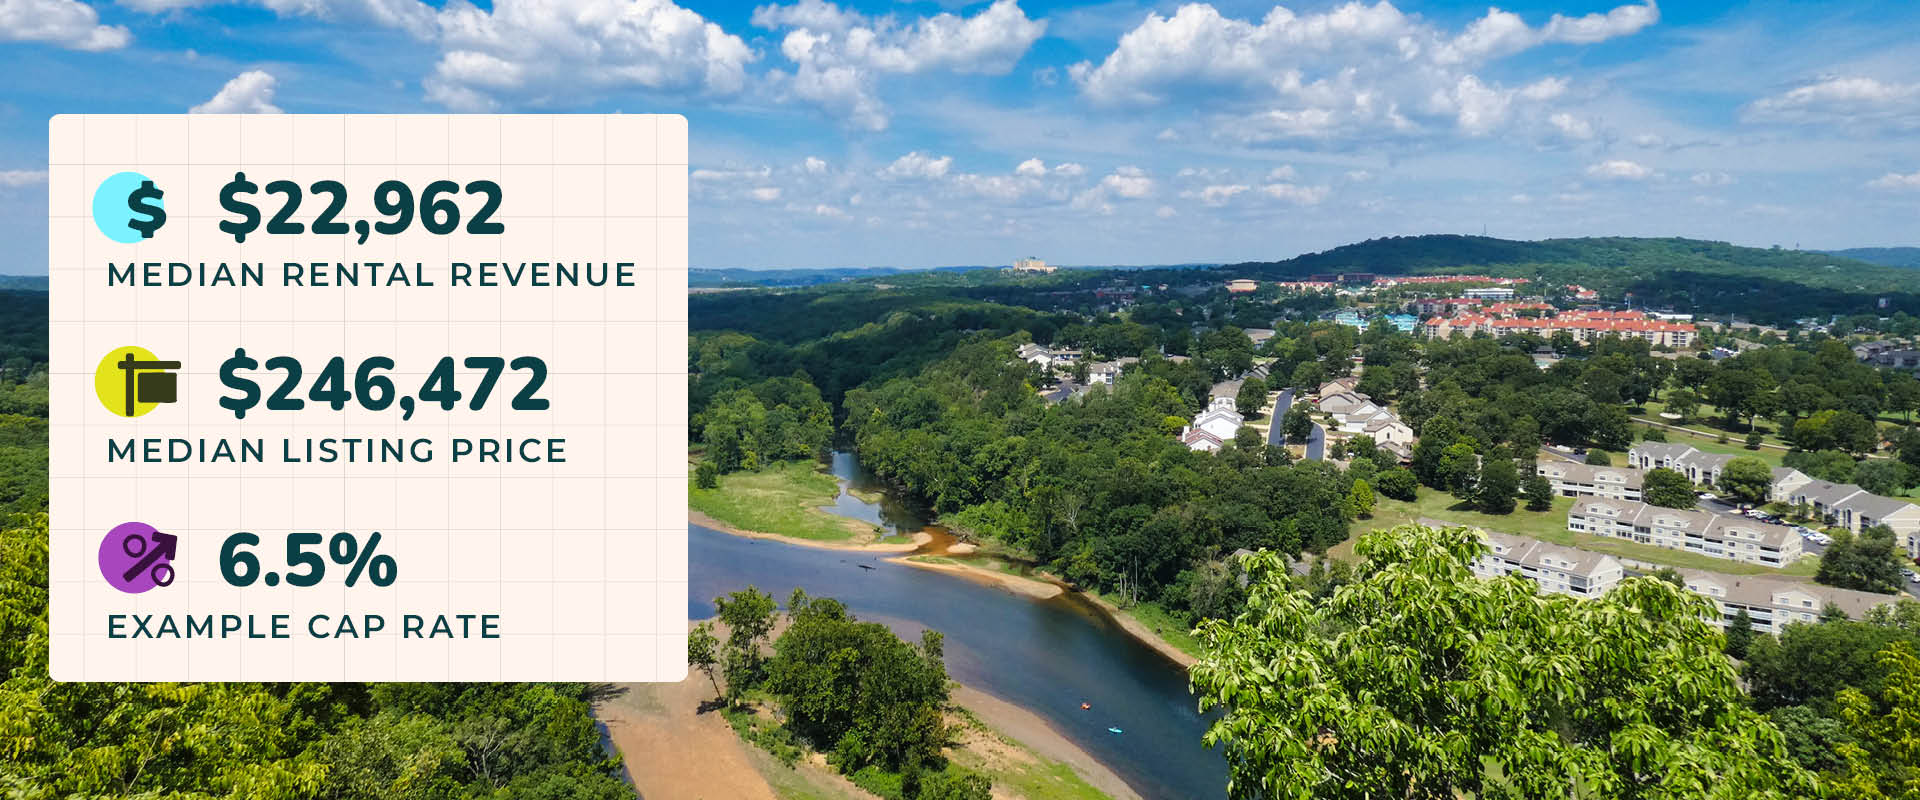 Aerial photo of Branson, MO and its lush forested surroundings with rivers running through the trees. Image text reads, "$22,962 median rental revenue. $246,472 median listing price. 6.5% example cap rate."